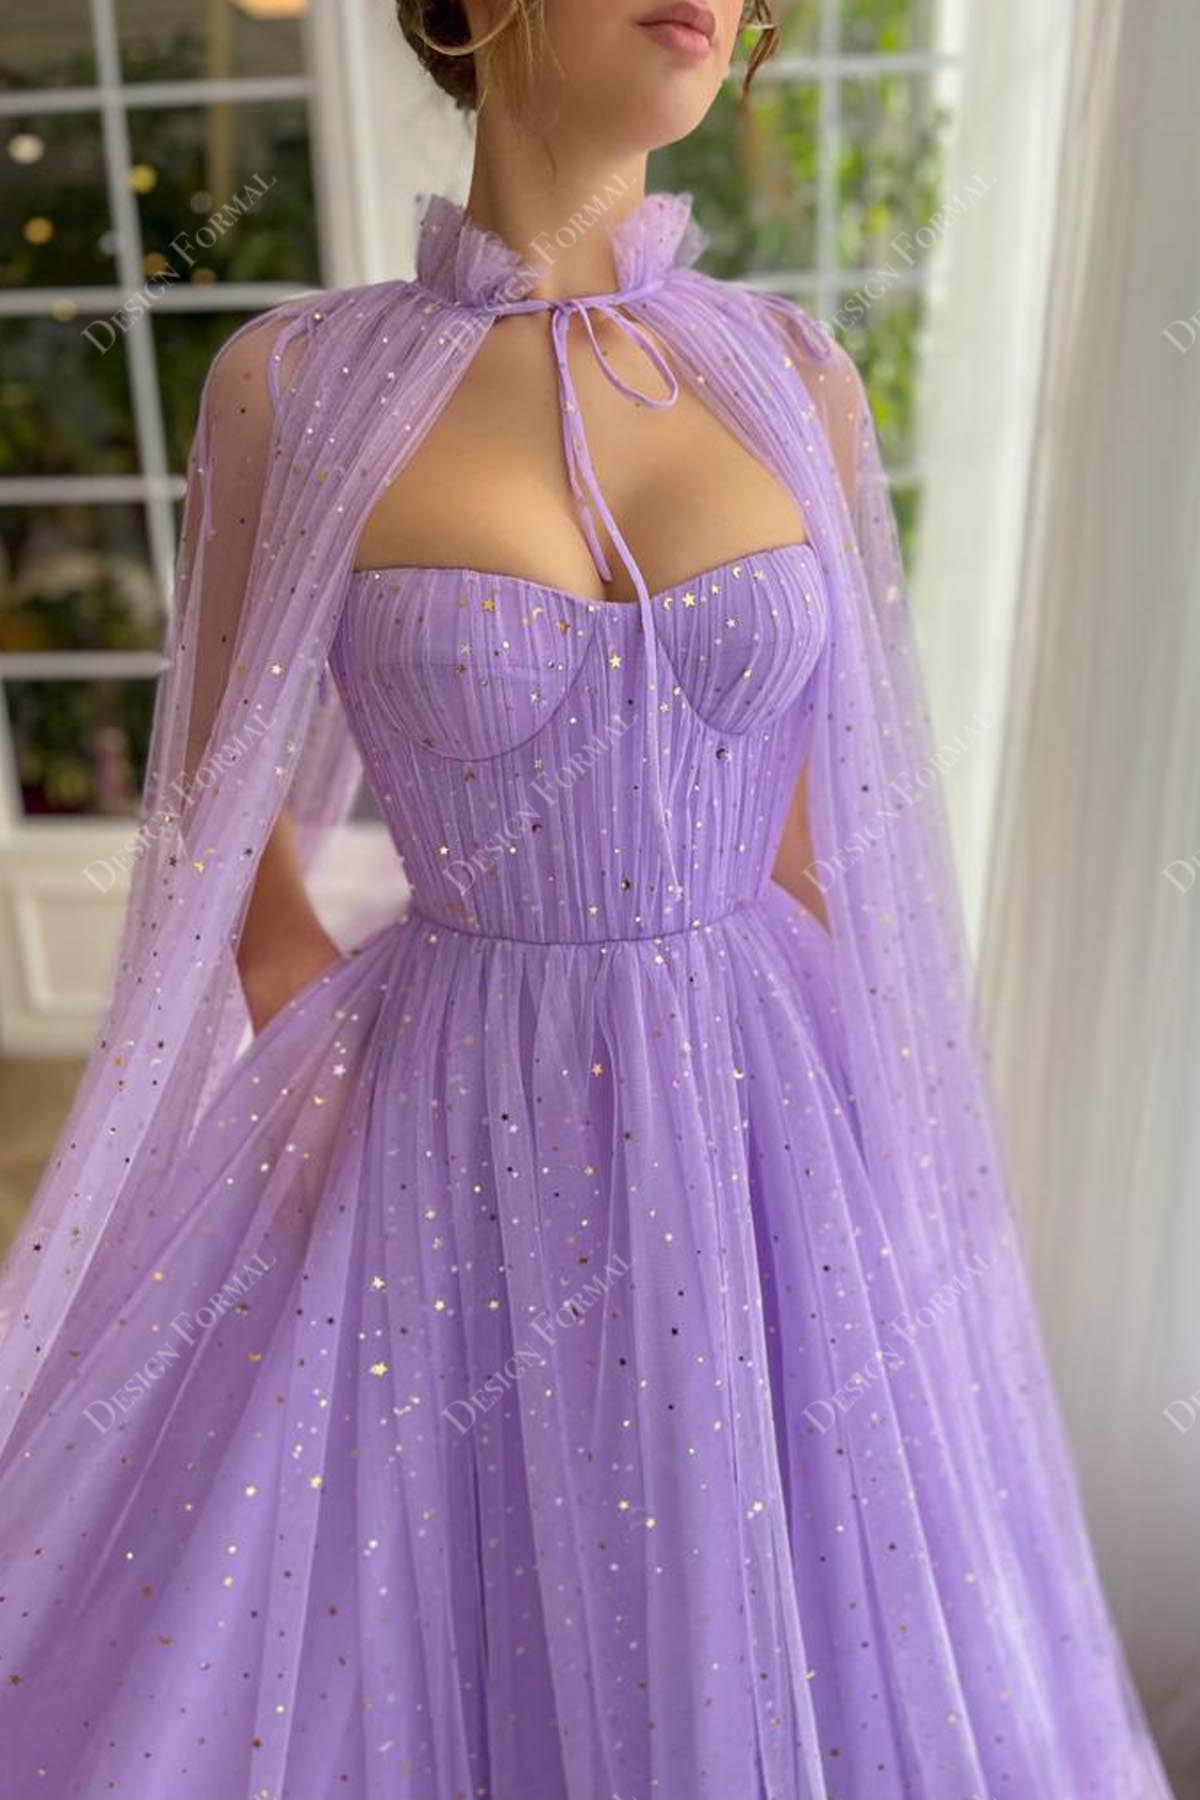 corset dress with high neck cape